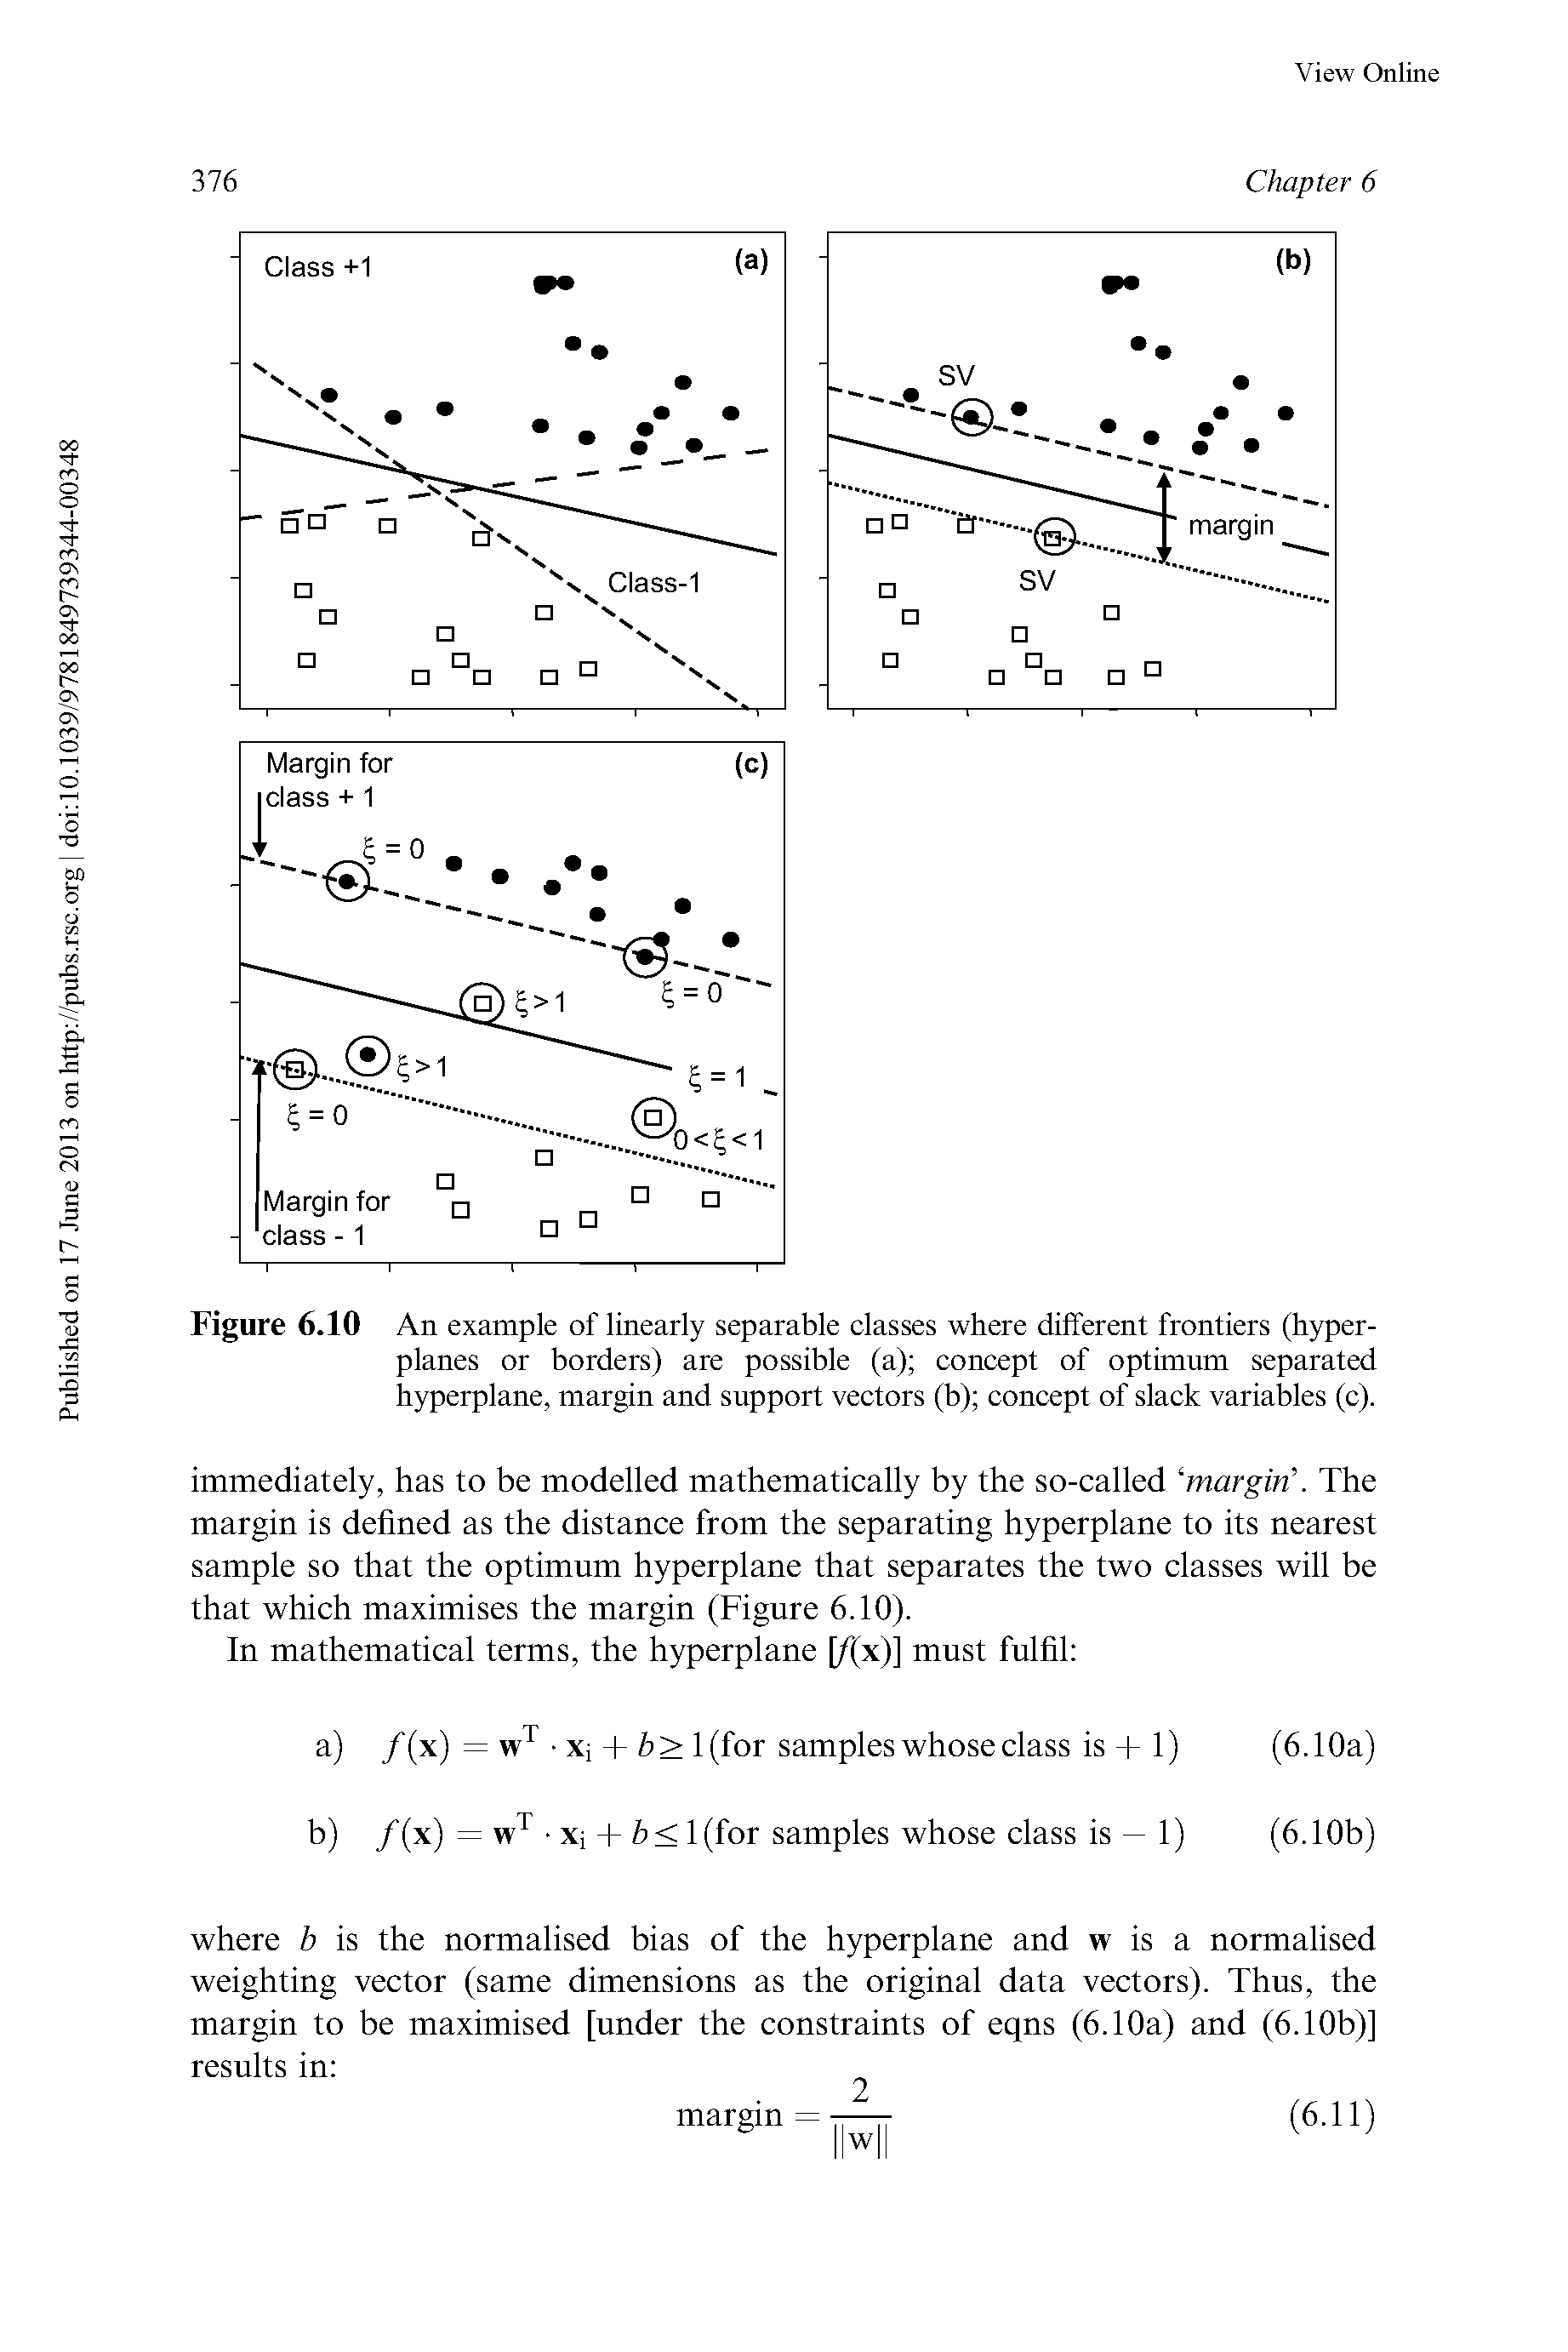 Figure 6.10 An example of linearly separable classes where different frontiers (hyperplanes or borders) are possible (a) concept of optimum separated hyperplane, margin and support vectors (b) concept of slack variables (c).